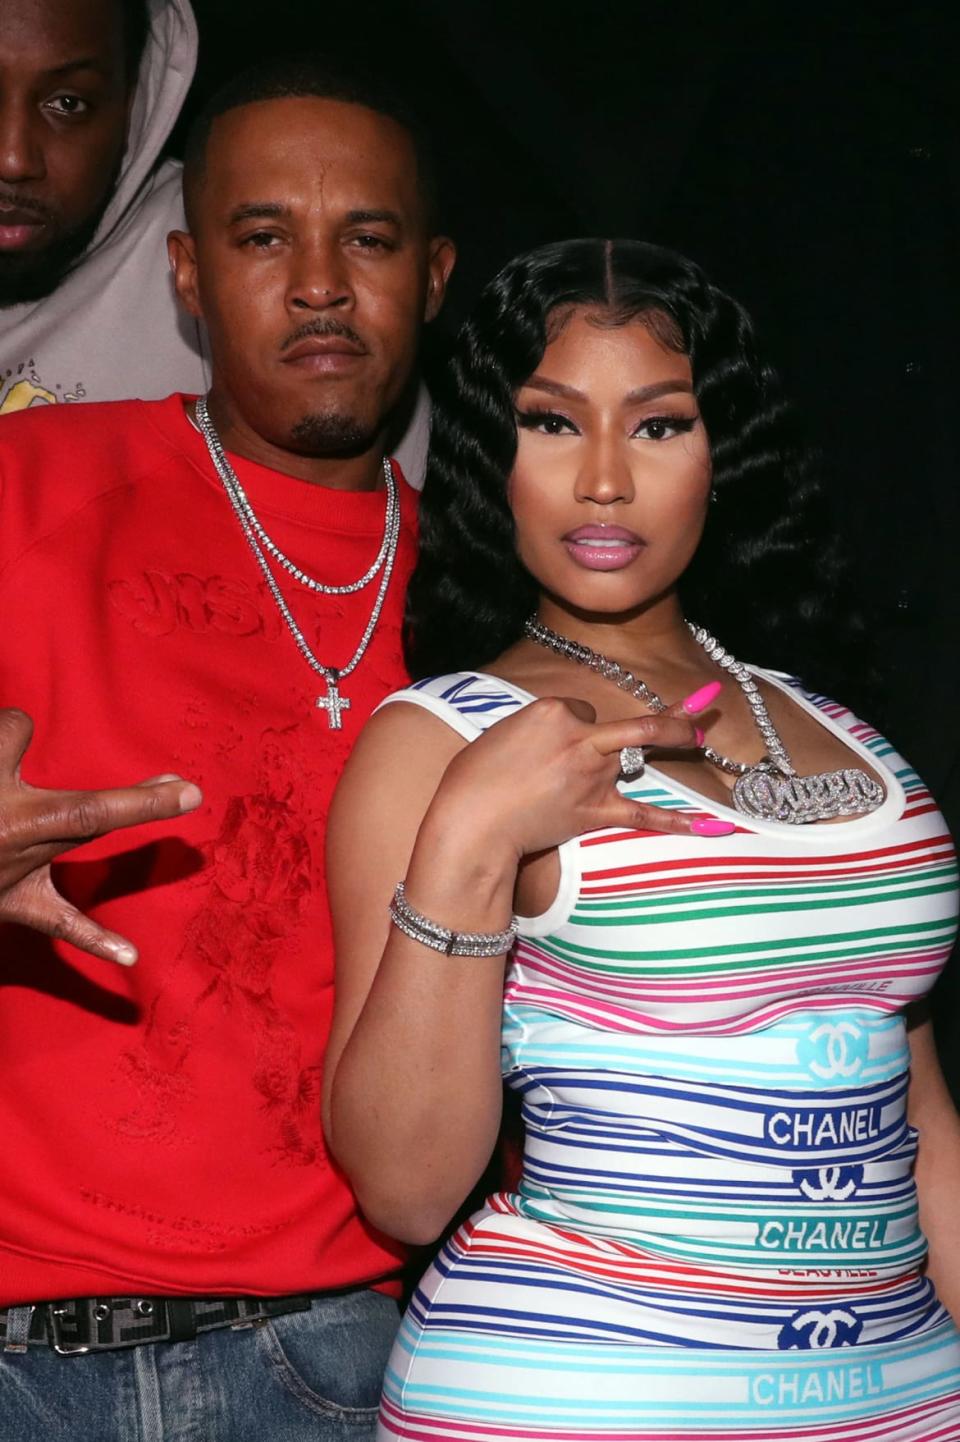 <div class="inline-image__caption"><p>Kenneth Petty and Nicki Minaj attend Church On Sundays Hosted By Nicki Minaj And Phil The Mayor And DJ Clues Birthday Party at The Argyle on February 8, 2019, in Hollywood, California.</p></div> <div class="inline-image__credit">Johnny Nunez/Getty</div>